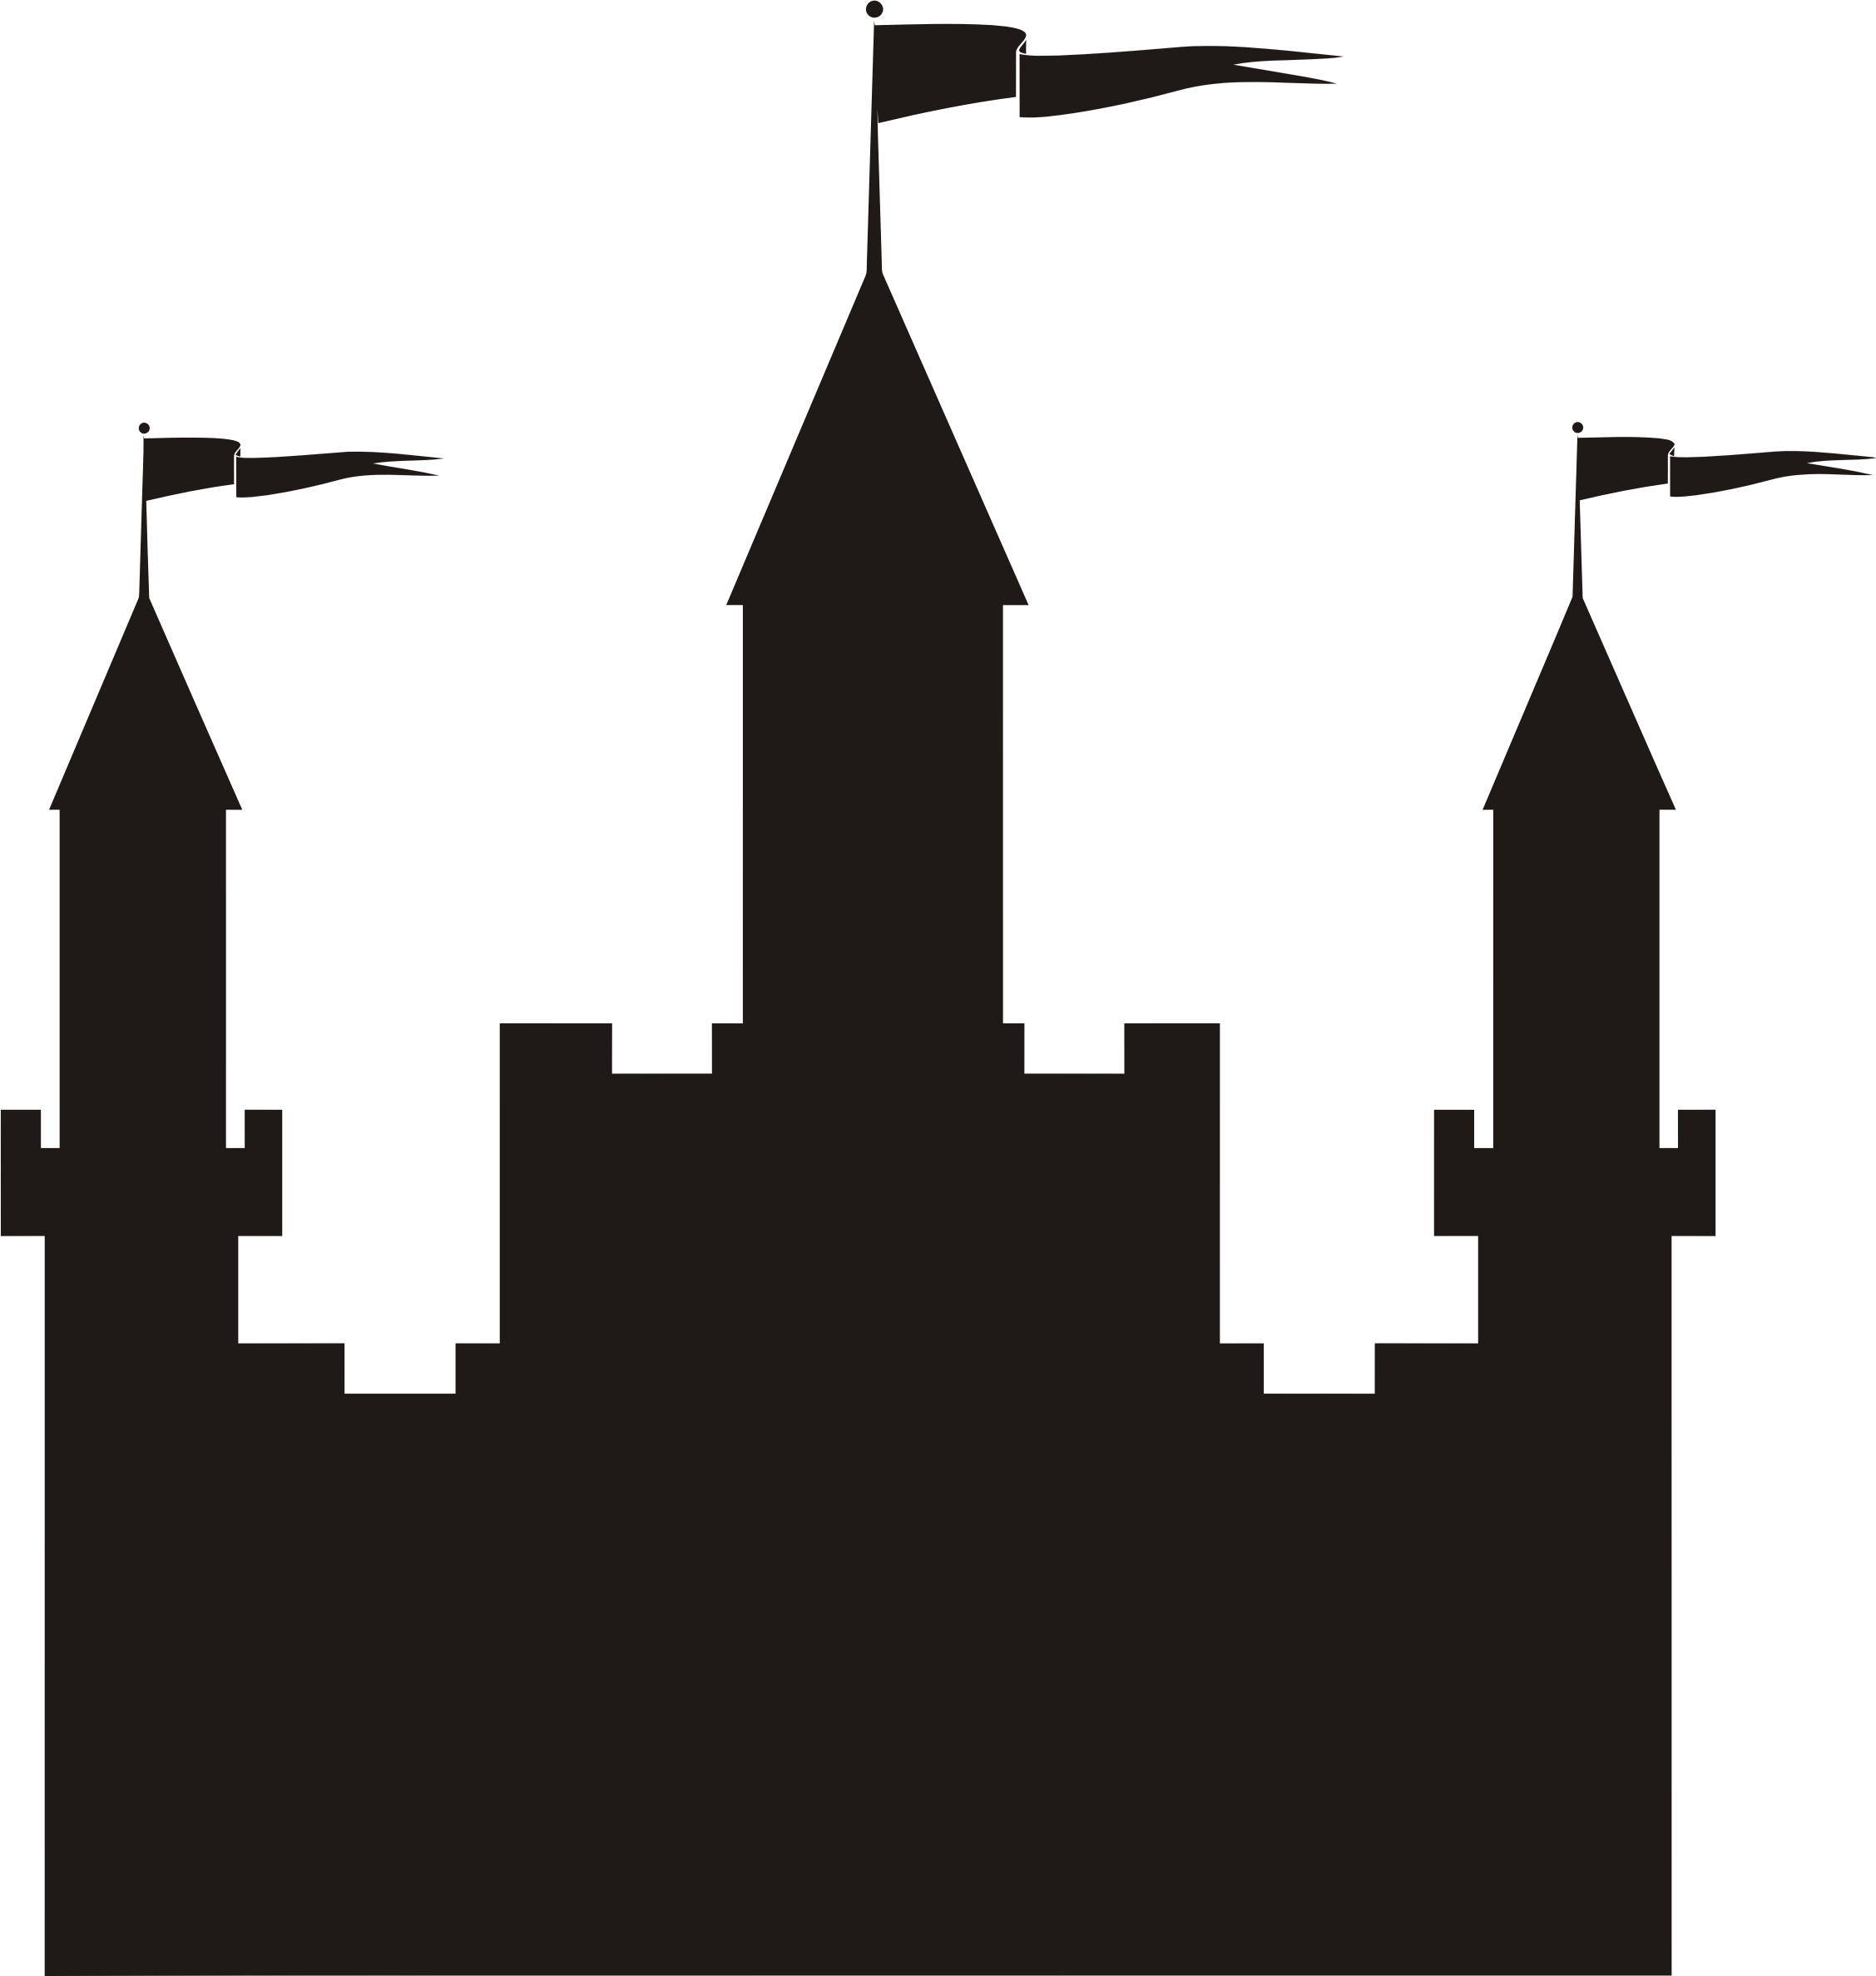 Silhouette at getdrawings com. Fairytale clipart castle german